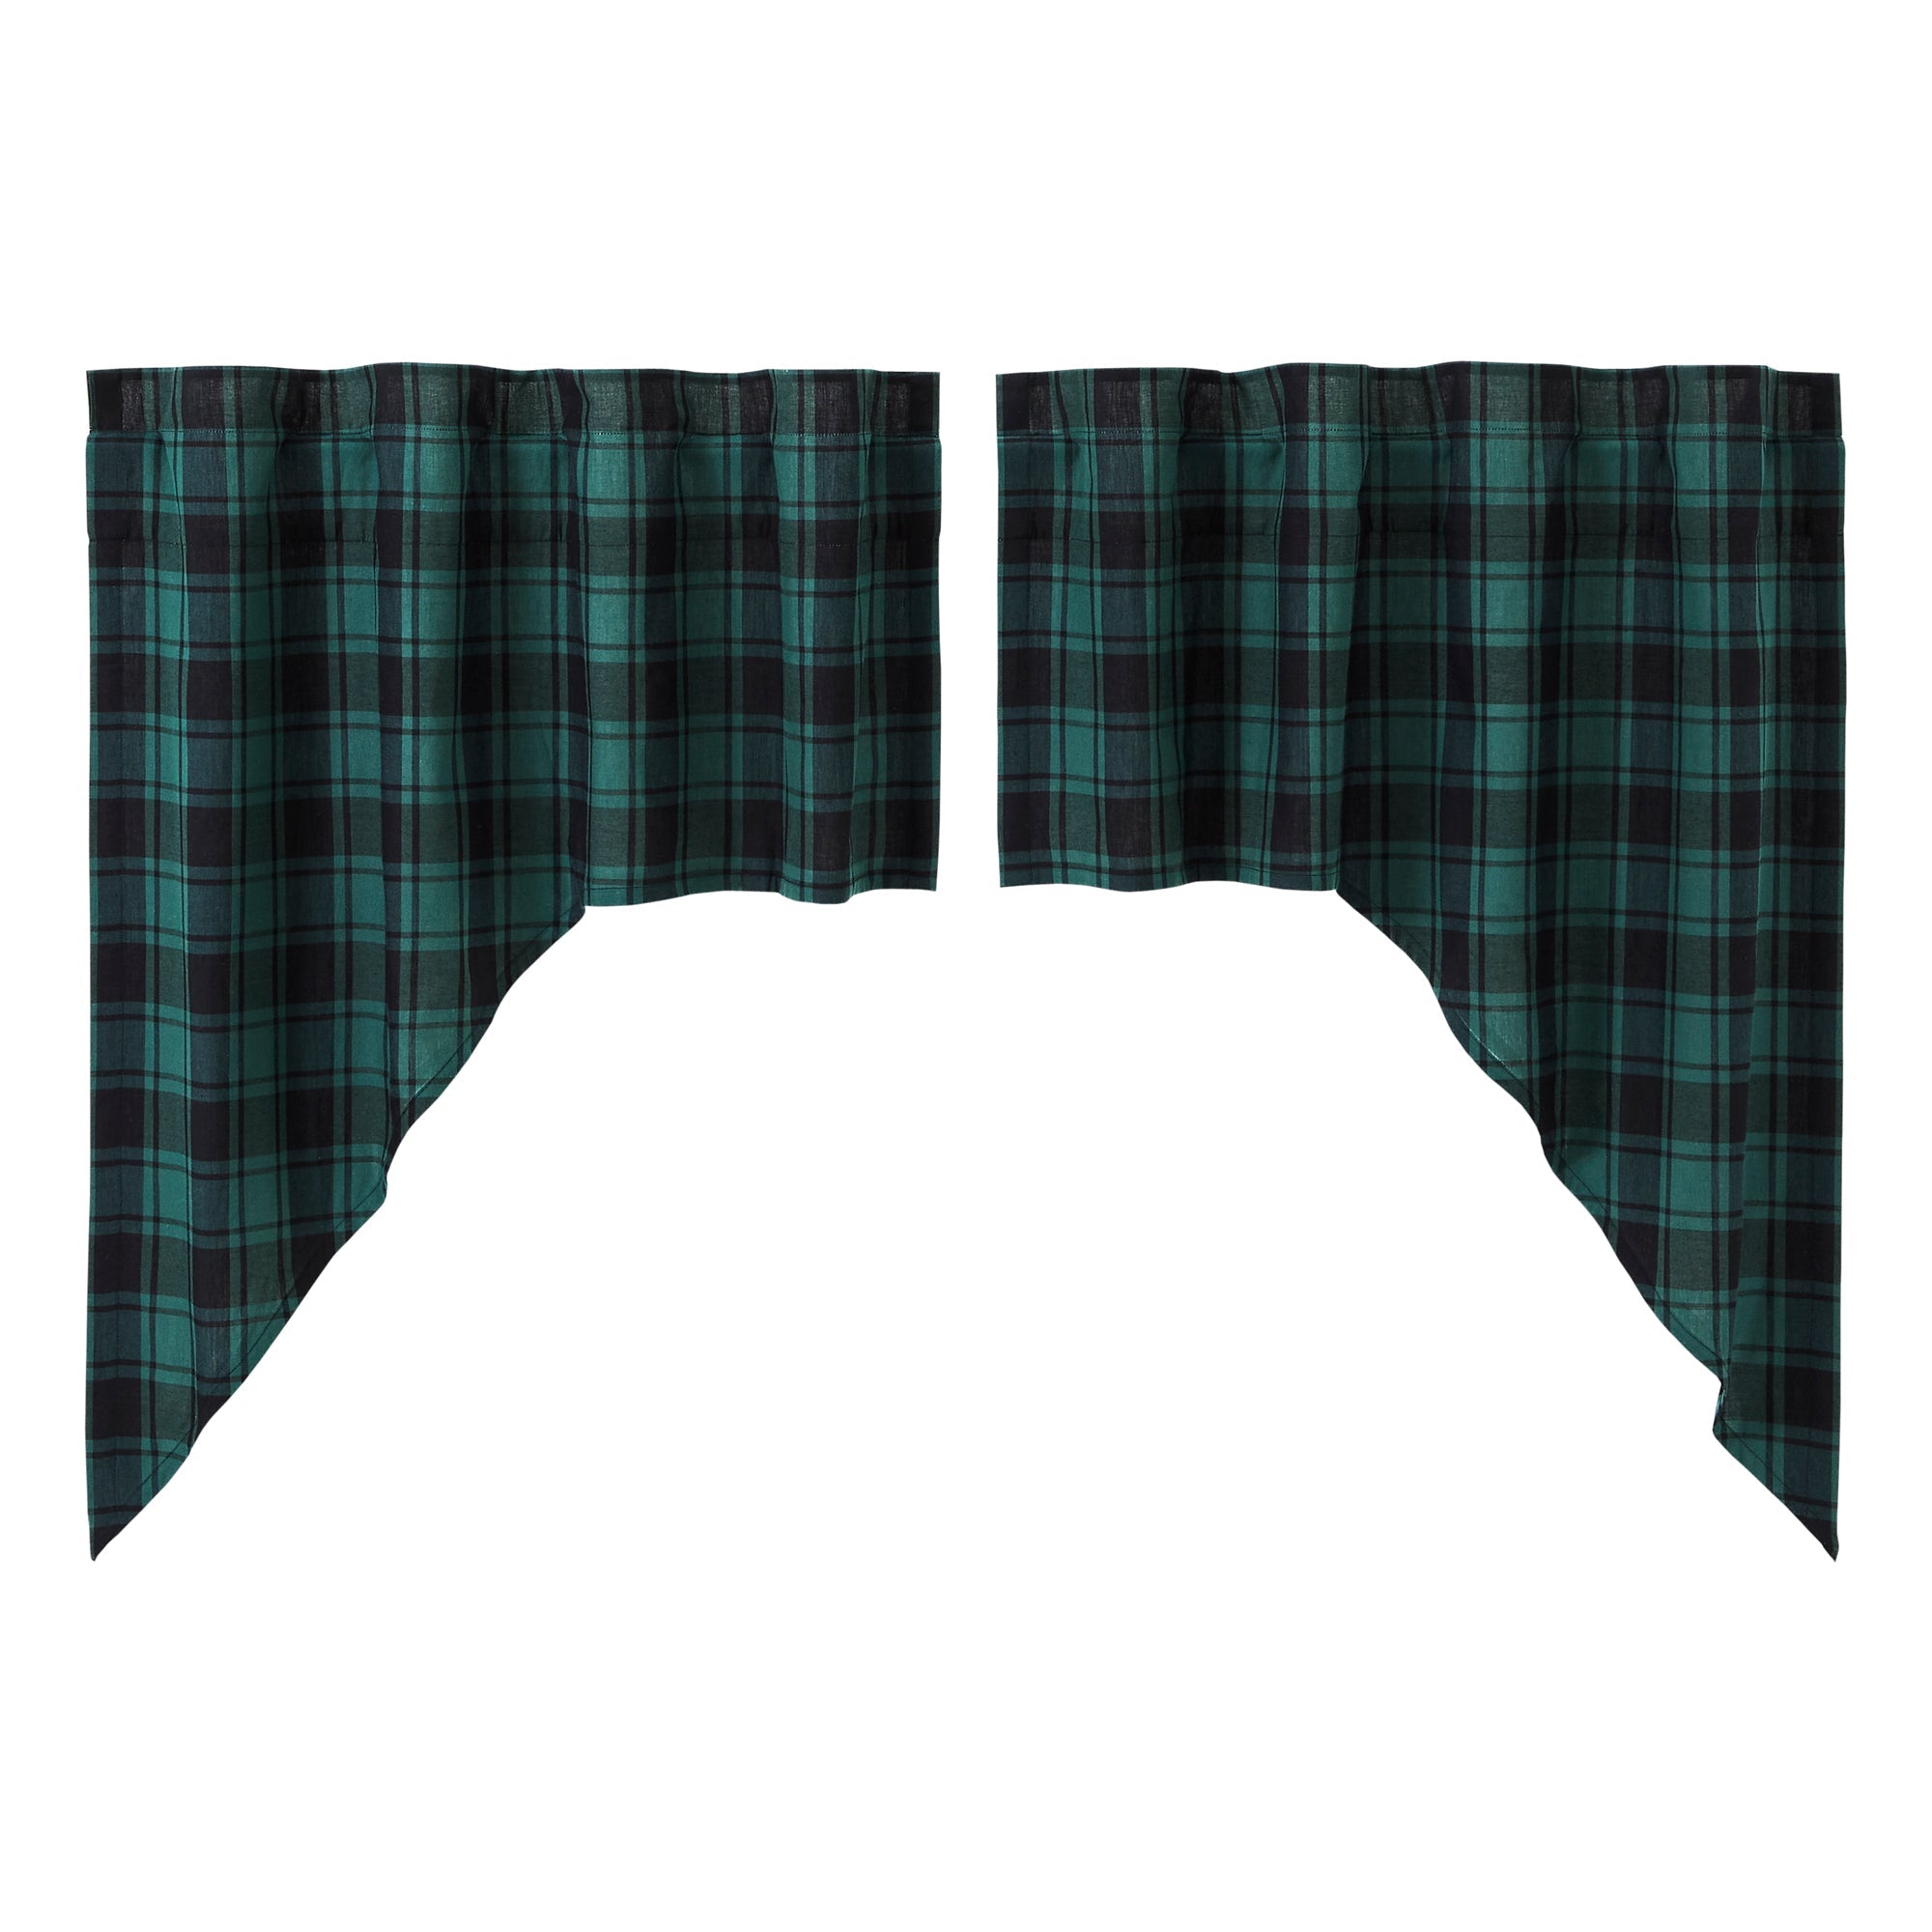 Pine Grove Swag Set of 2 36x36x16 VHC Brands